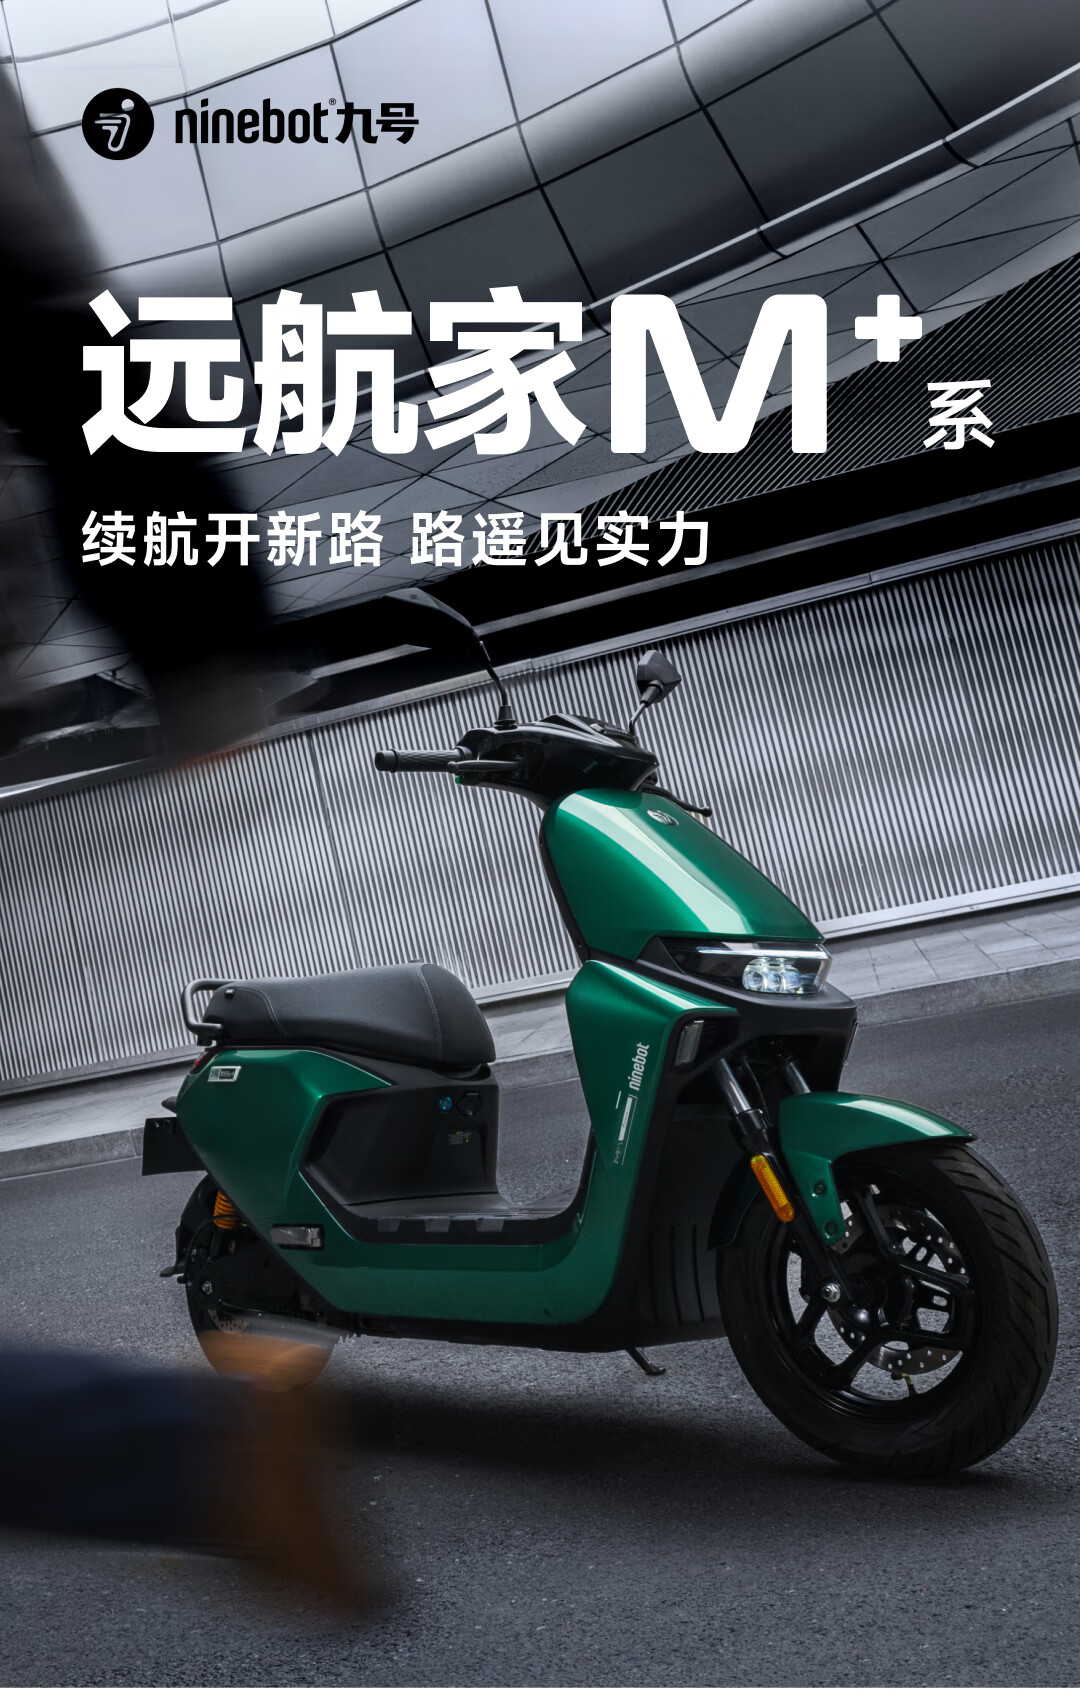 Nine Electric mistakenly marked the price of the M95c+ at 500 yuan. The user’s first vehicle that was photographed can be picked up normally.